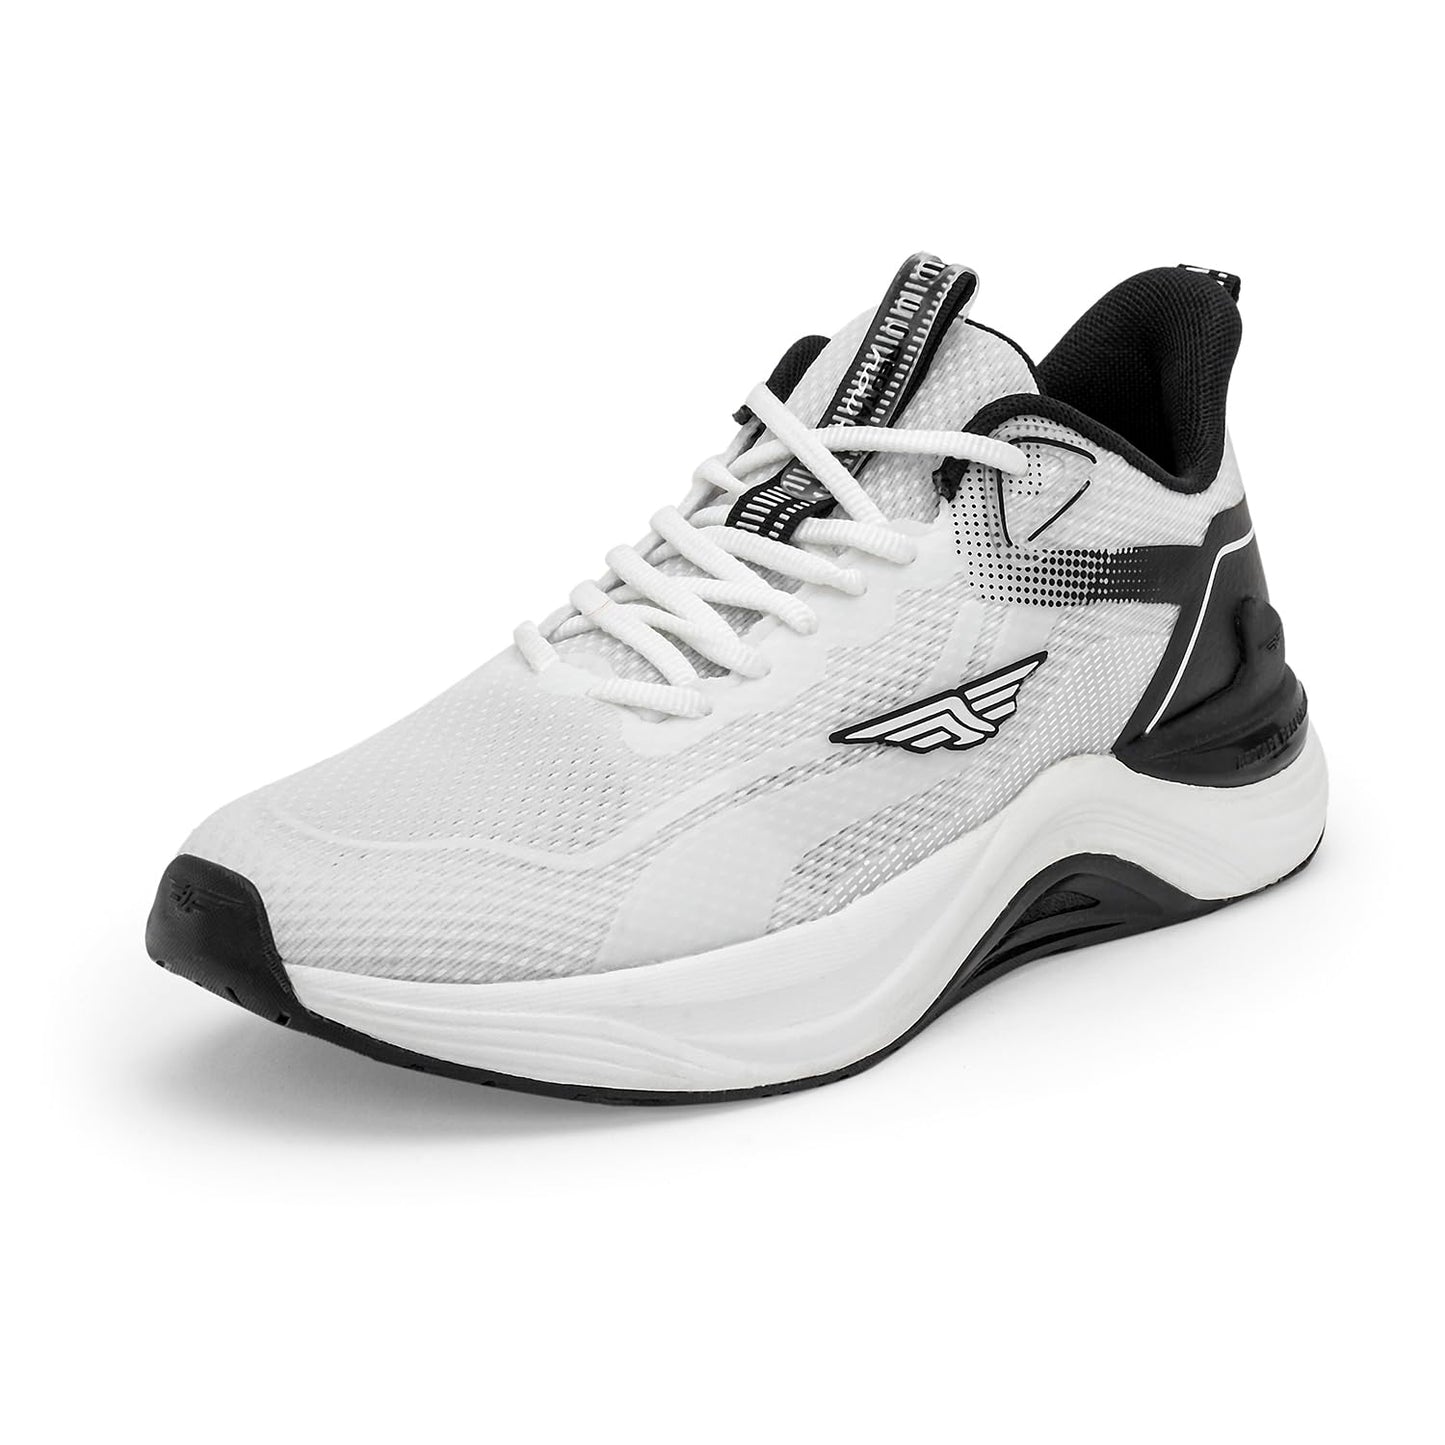 Red Tape Athleisure Sport Shoes for Men |Cultured Round-Toe Shape, Cushioning Technology & Smart Ventilation White